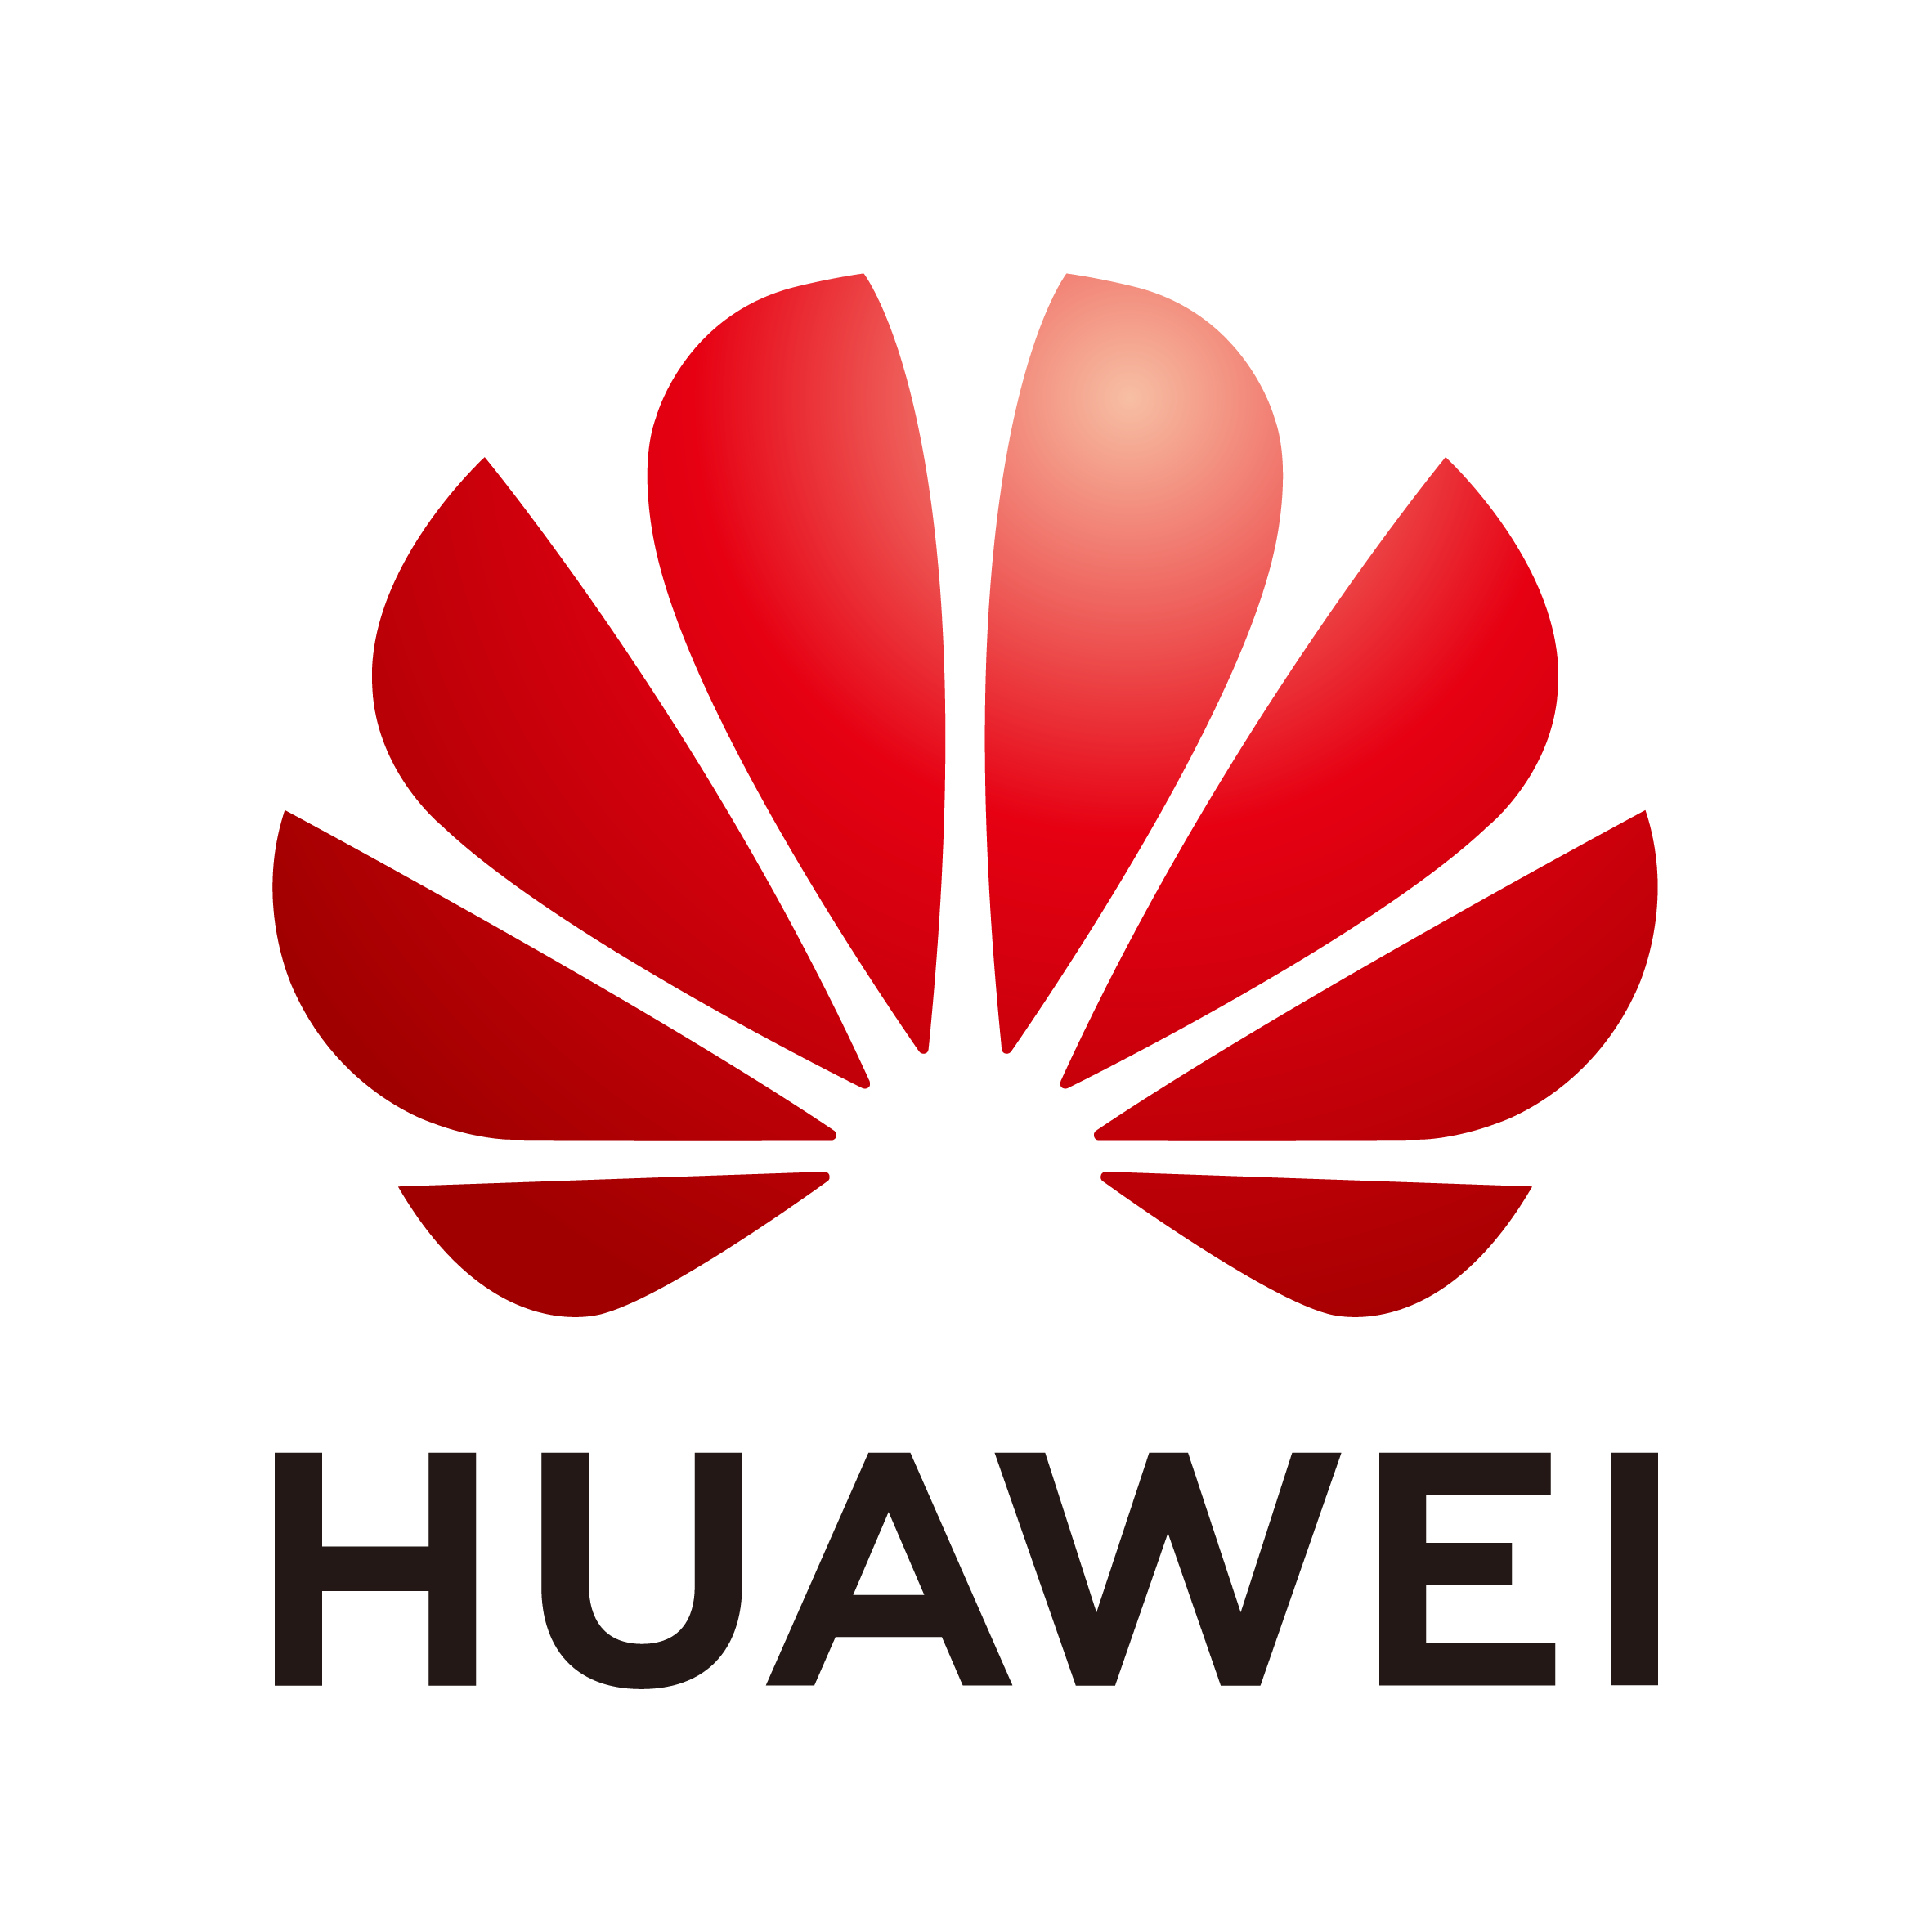 HKT, Huawei, The Excellent Product & Solution Partner (IP) award 2020